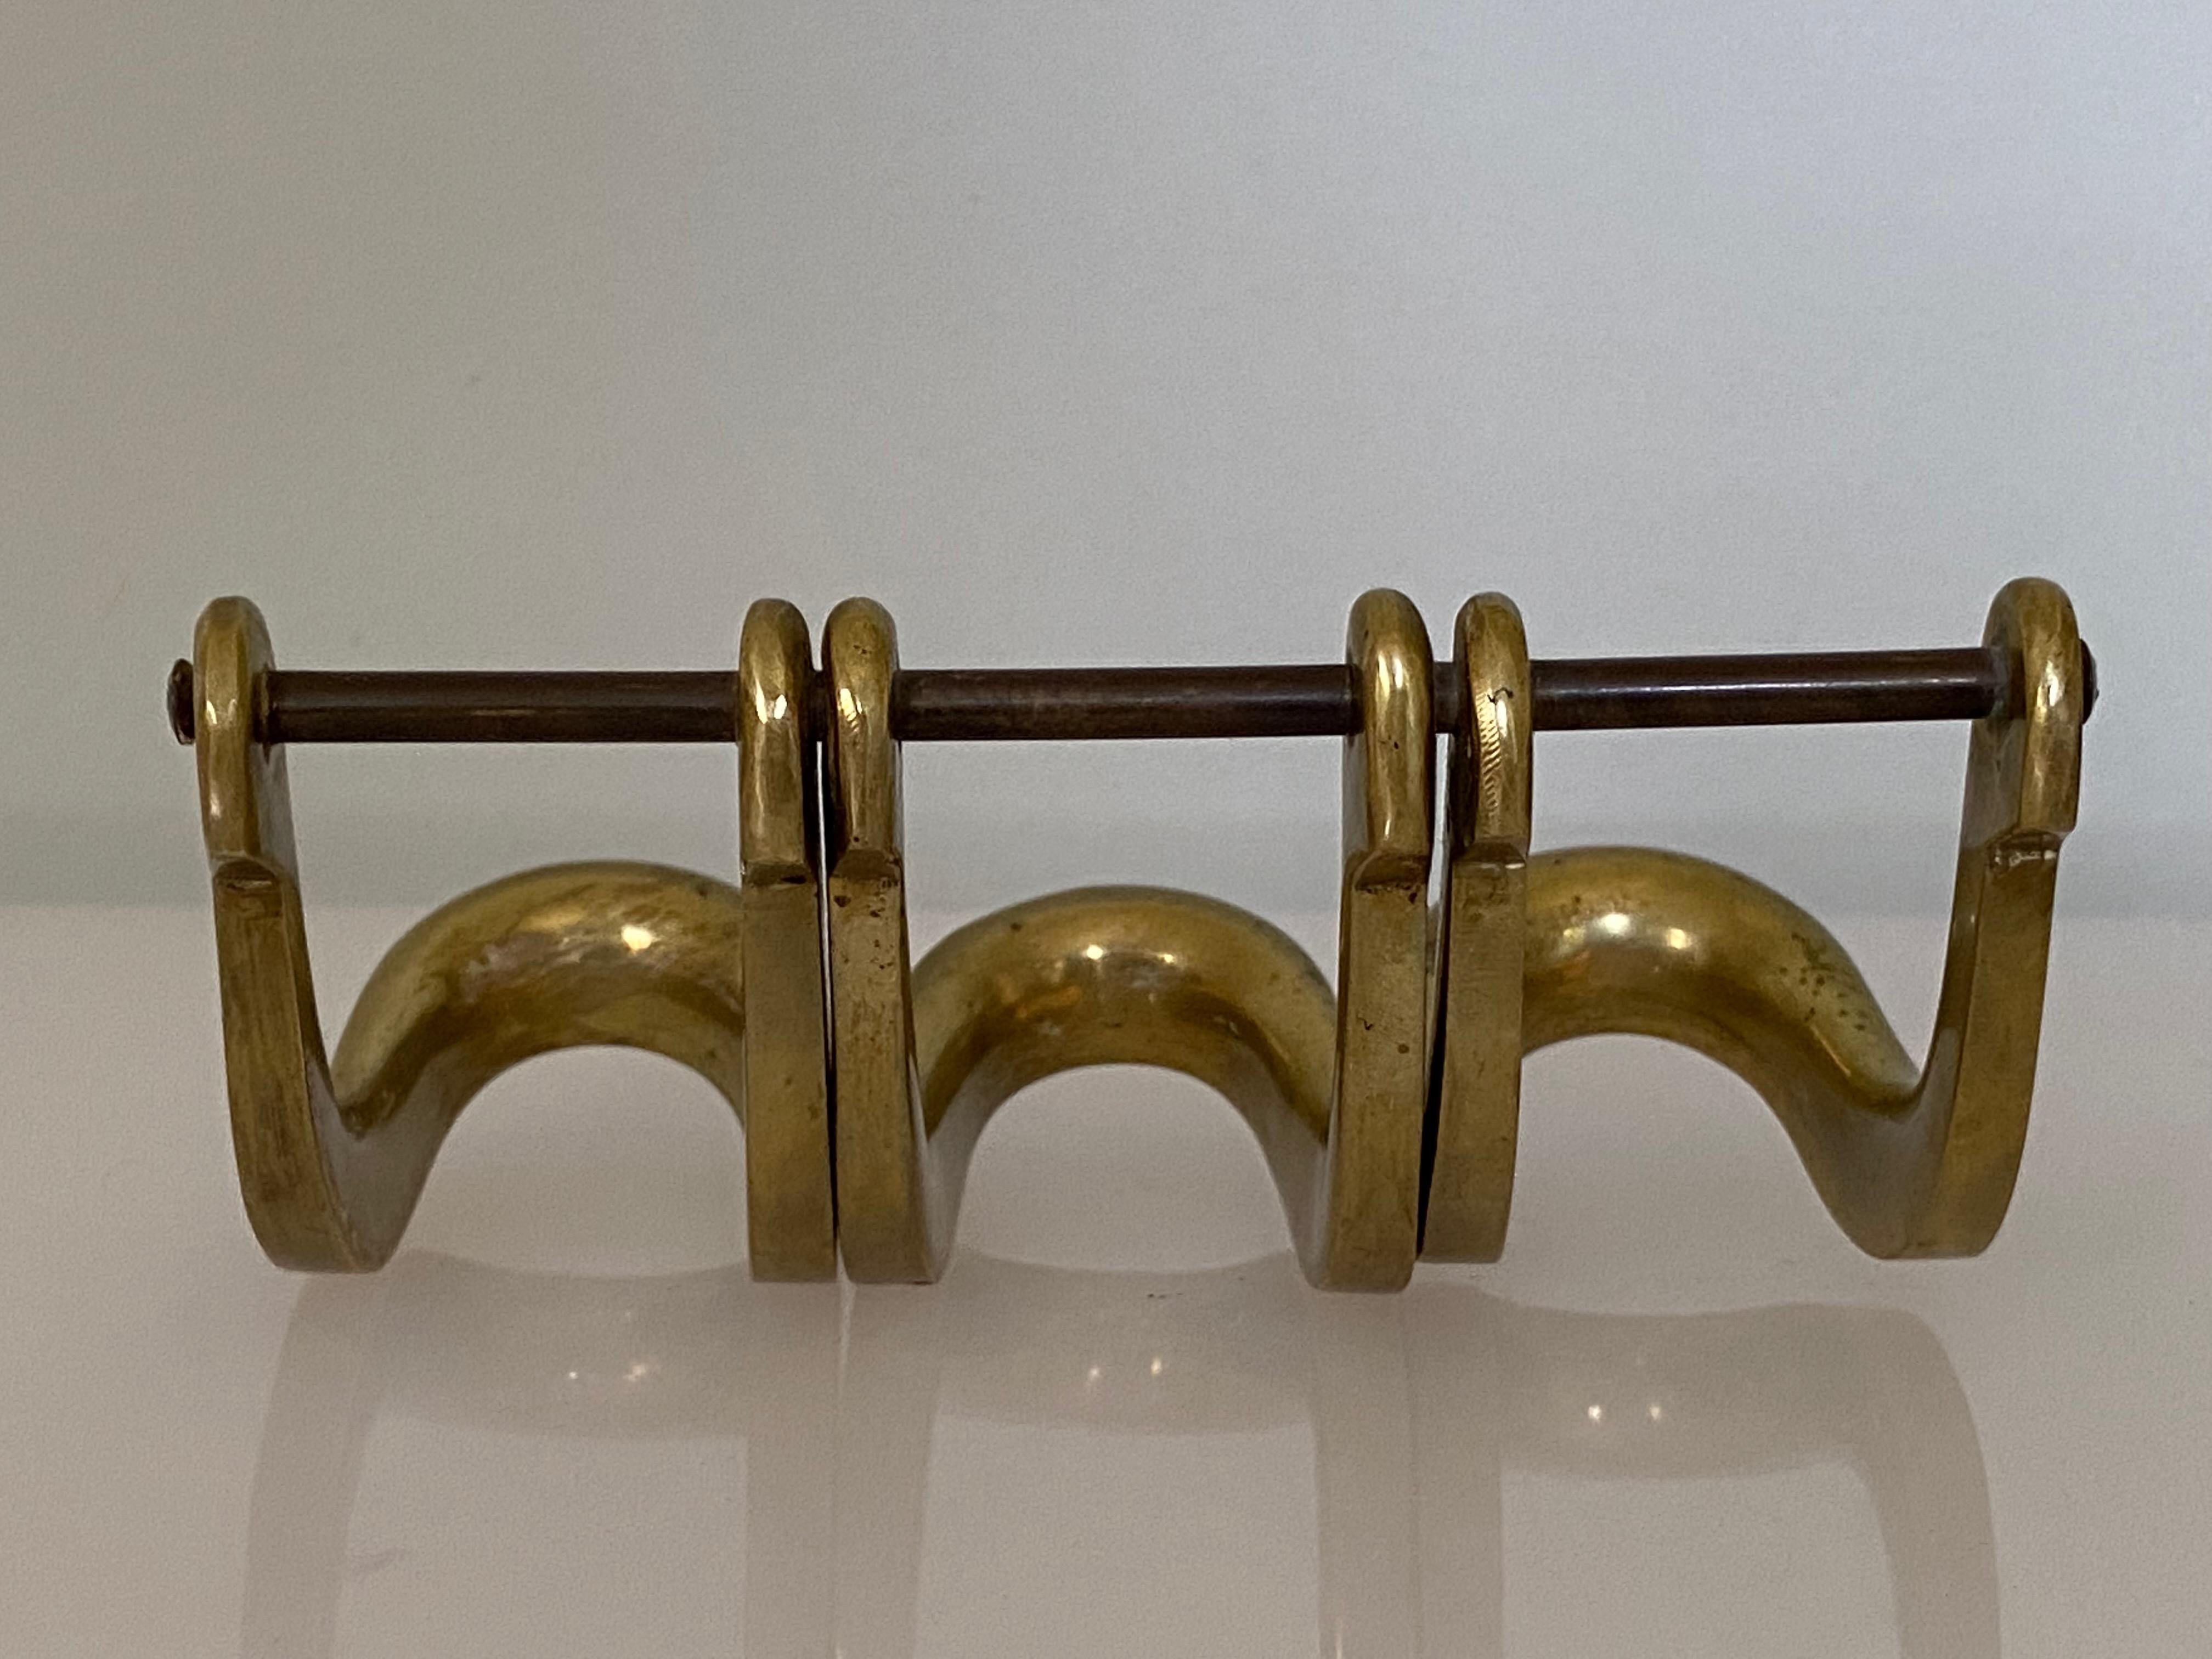 Pipe stand attributed to Carl Auböck. Produced by Illum Bolighus in Denmark.